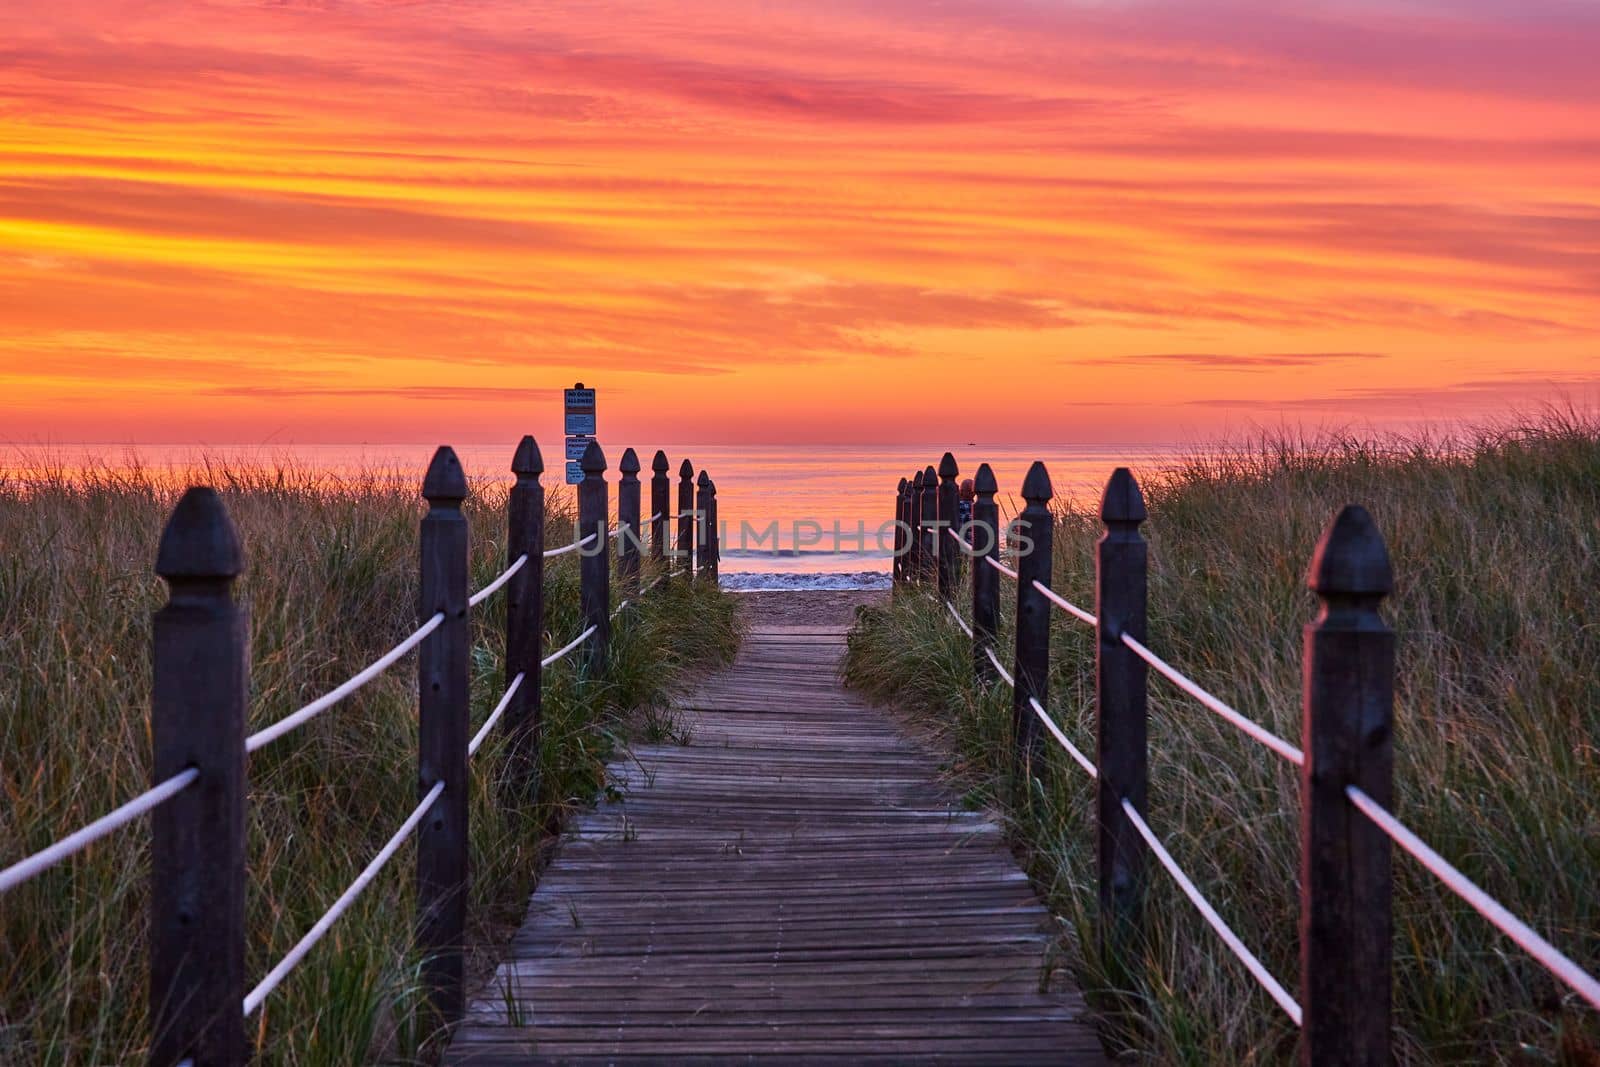 Image of Boardwalk path leading directly to Maine east coast ocean view during stunning orange and red sunrise